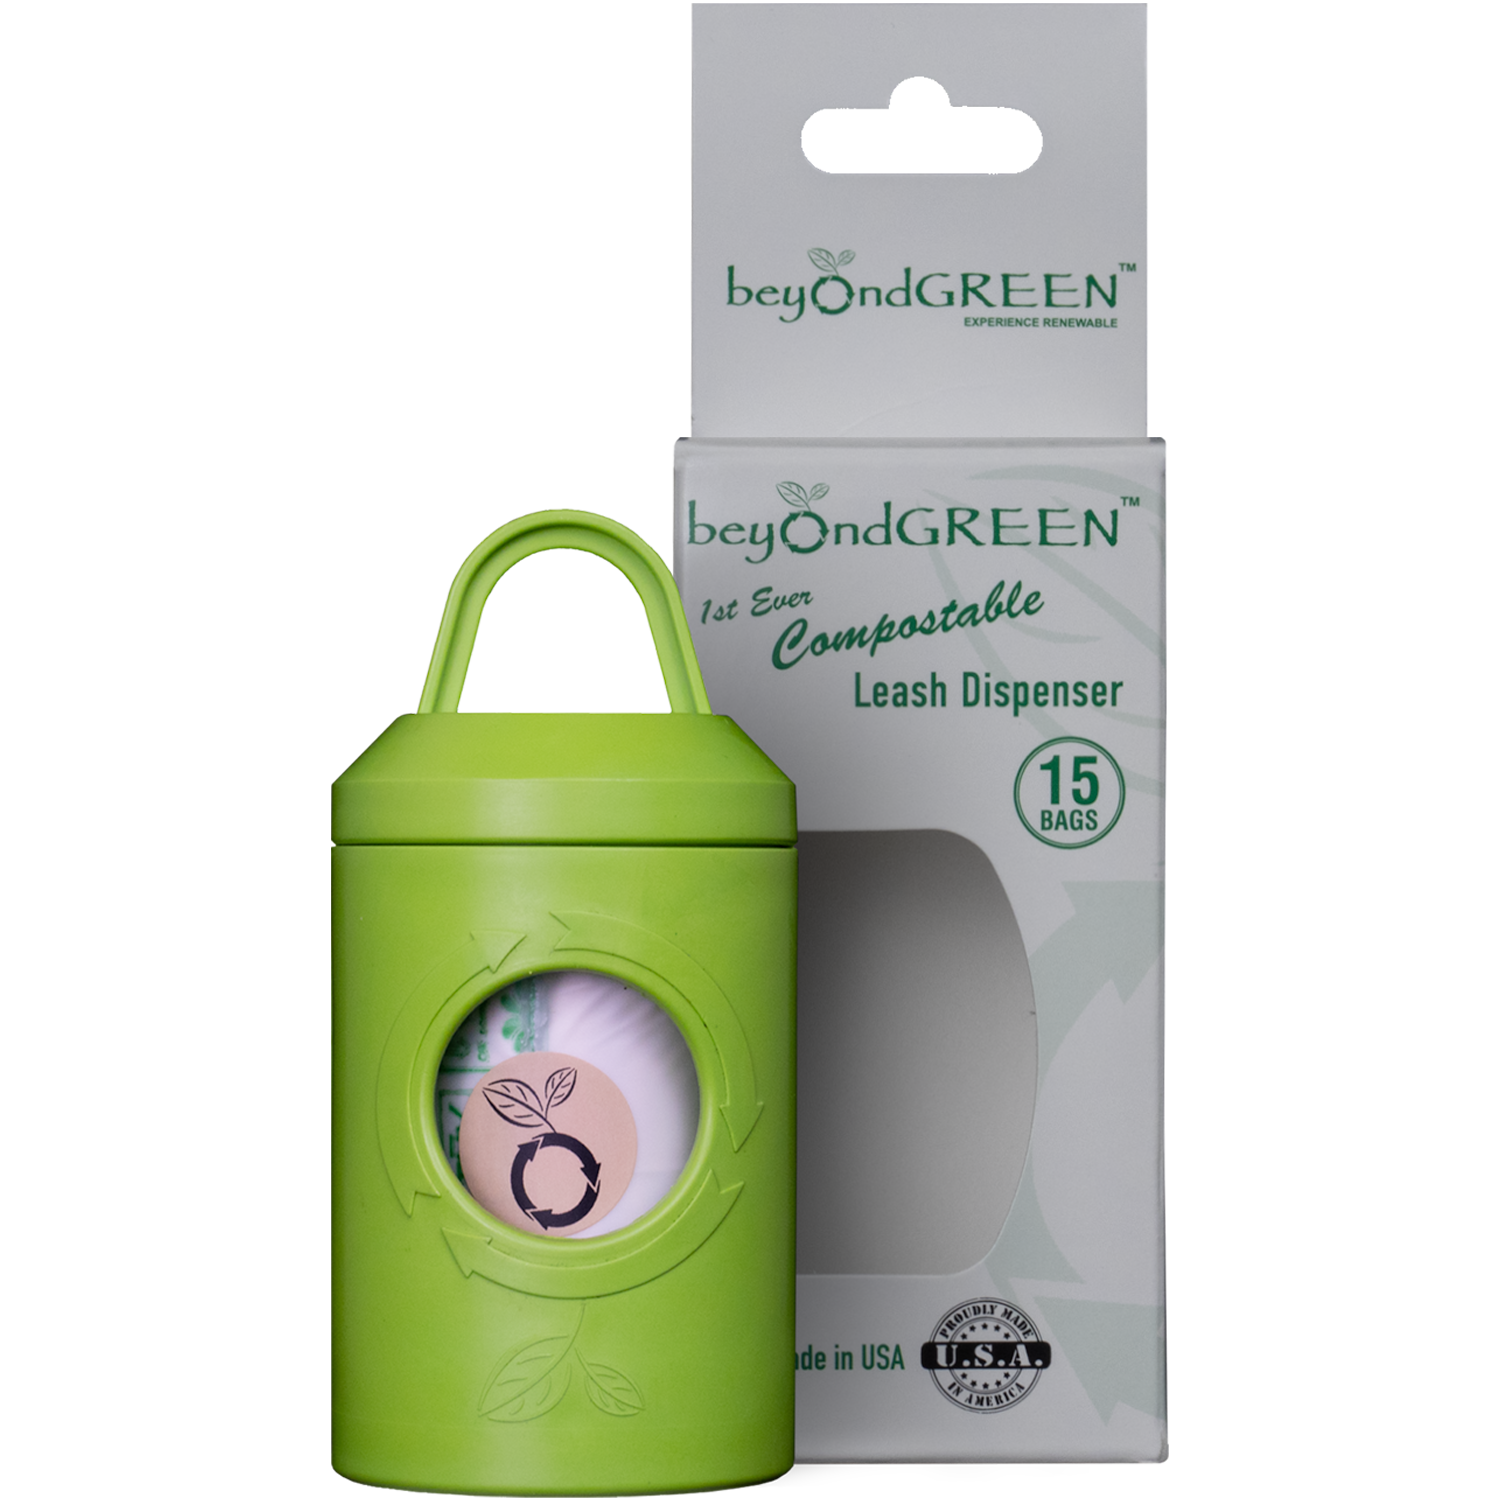 Dispenser along side packaging completely compostable manufactured by beyondGREEN